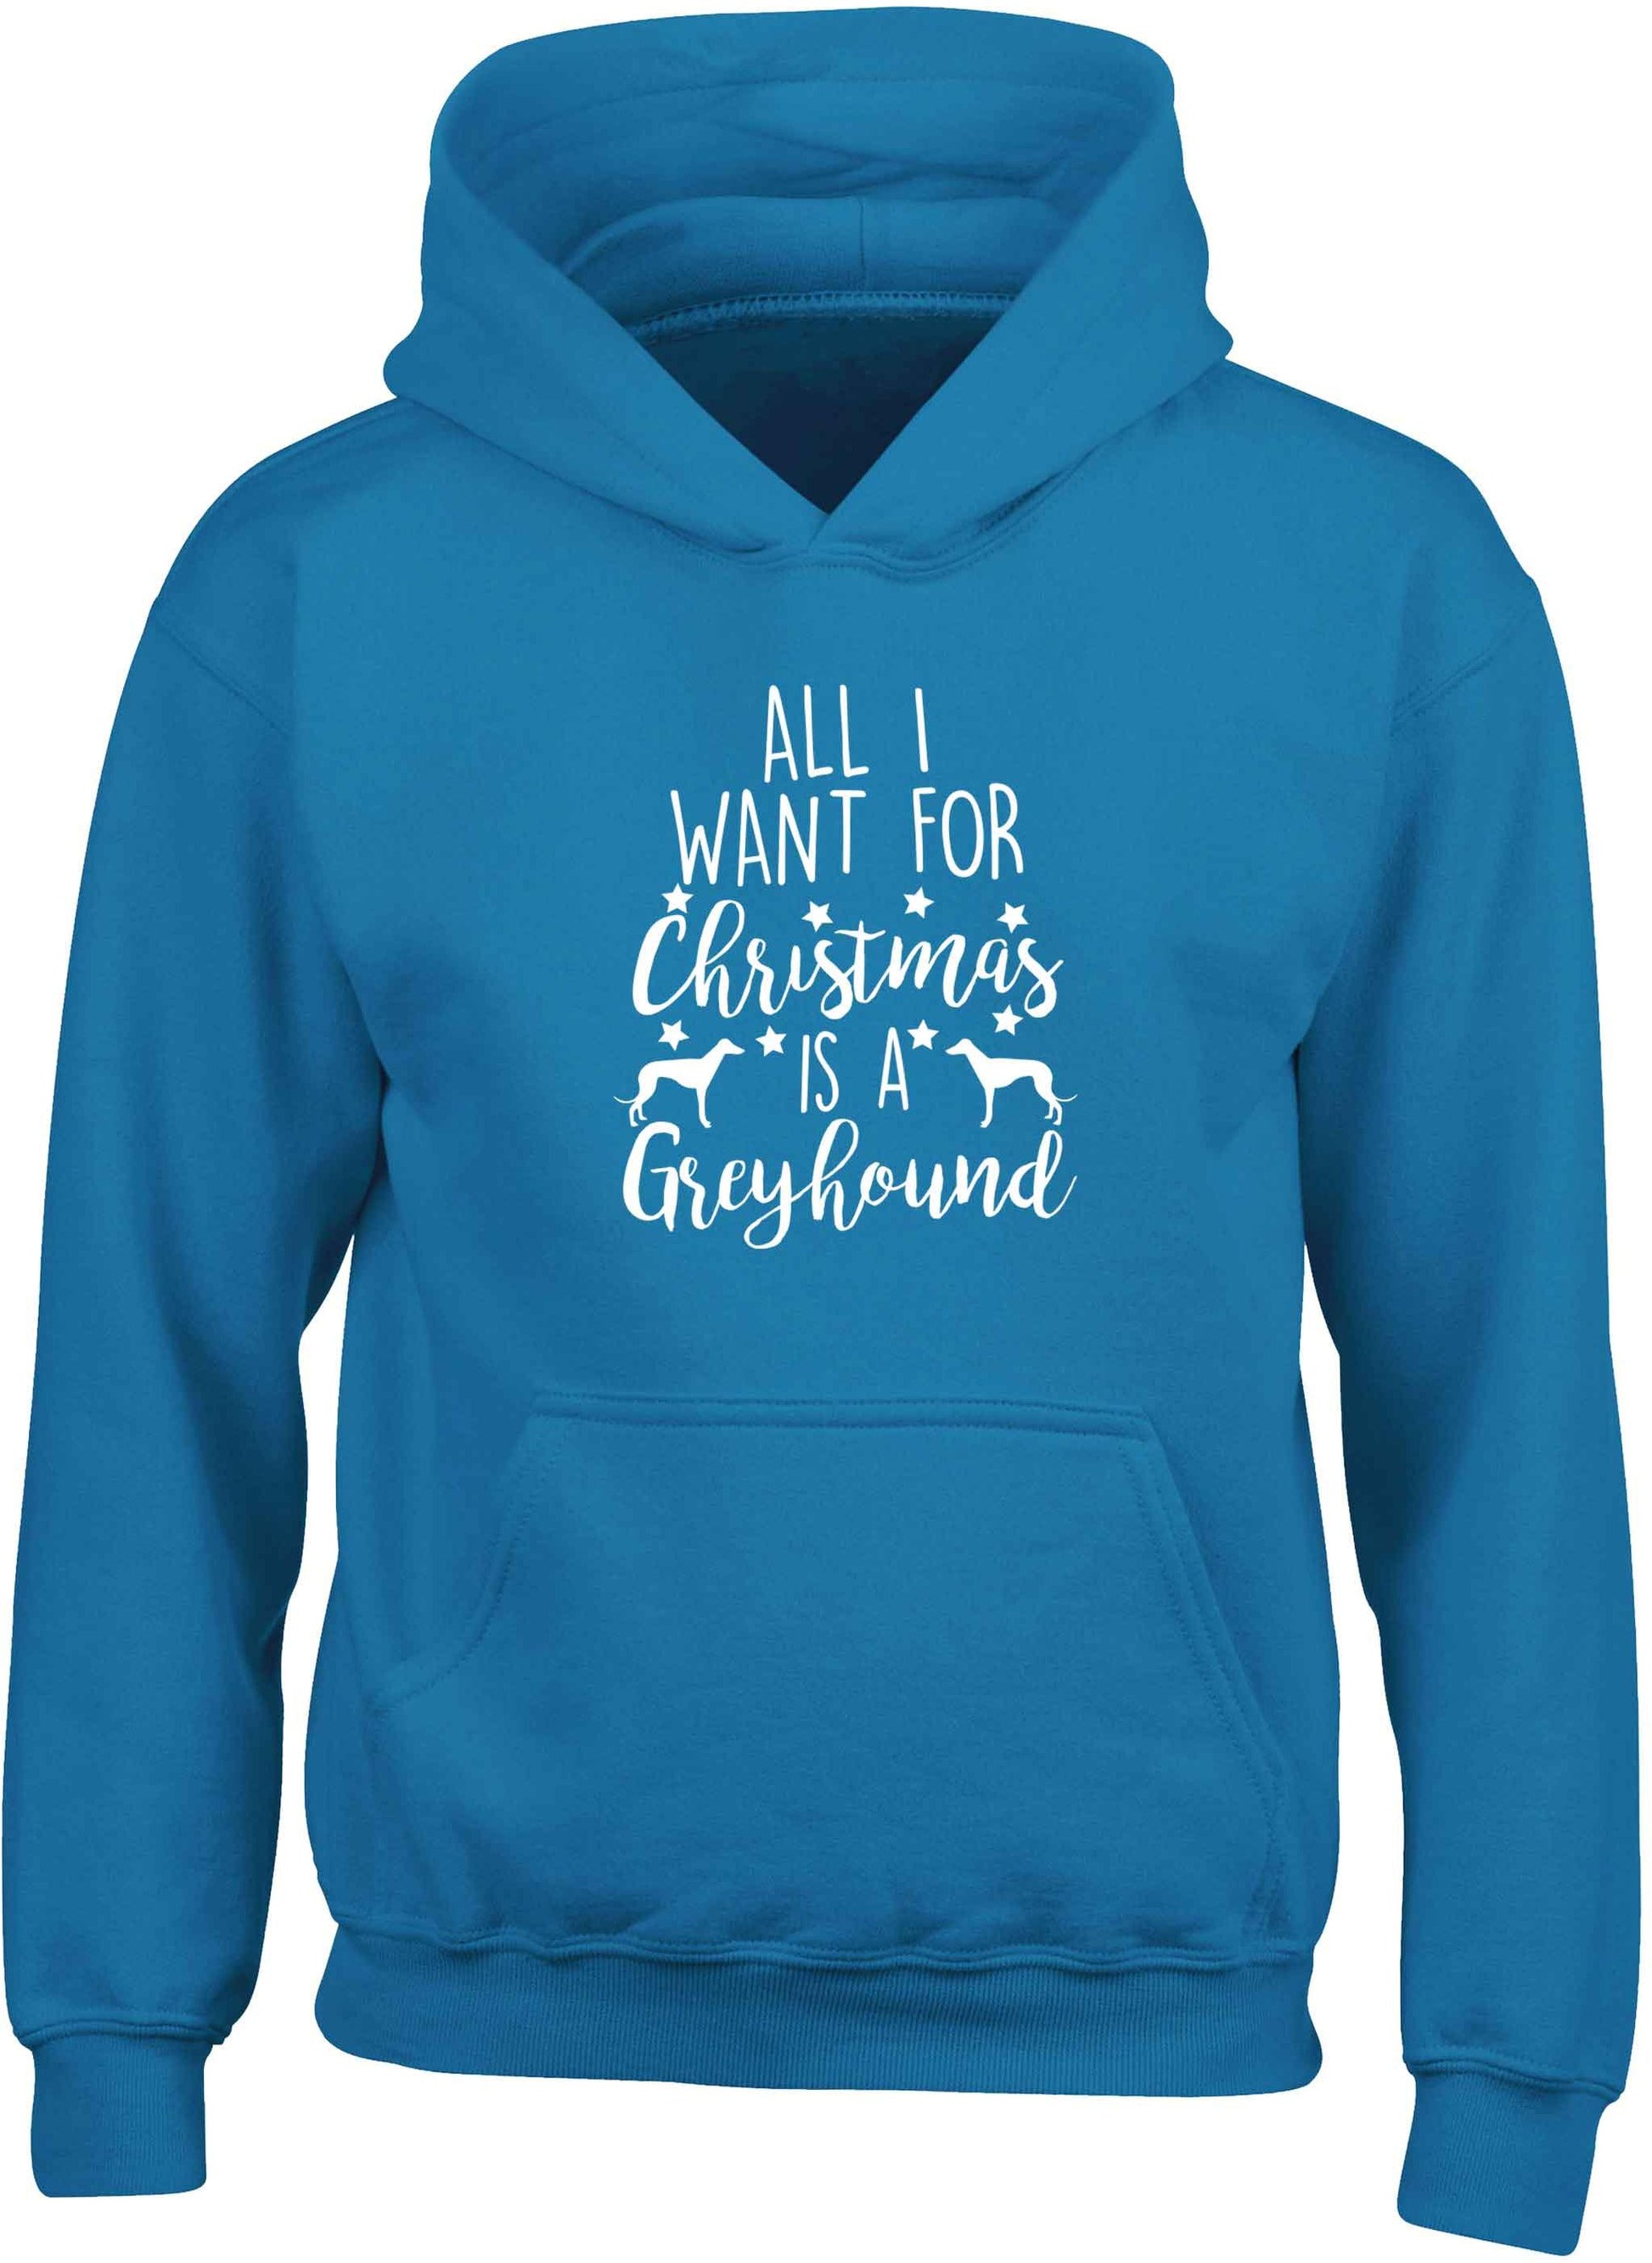 All I want for Christmas is a greyhound children's blue hoodie 12-13 Years